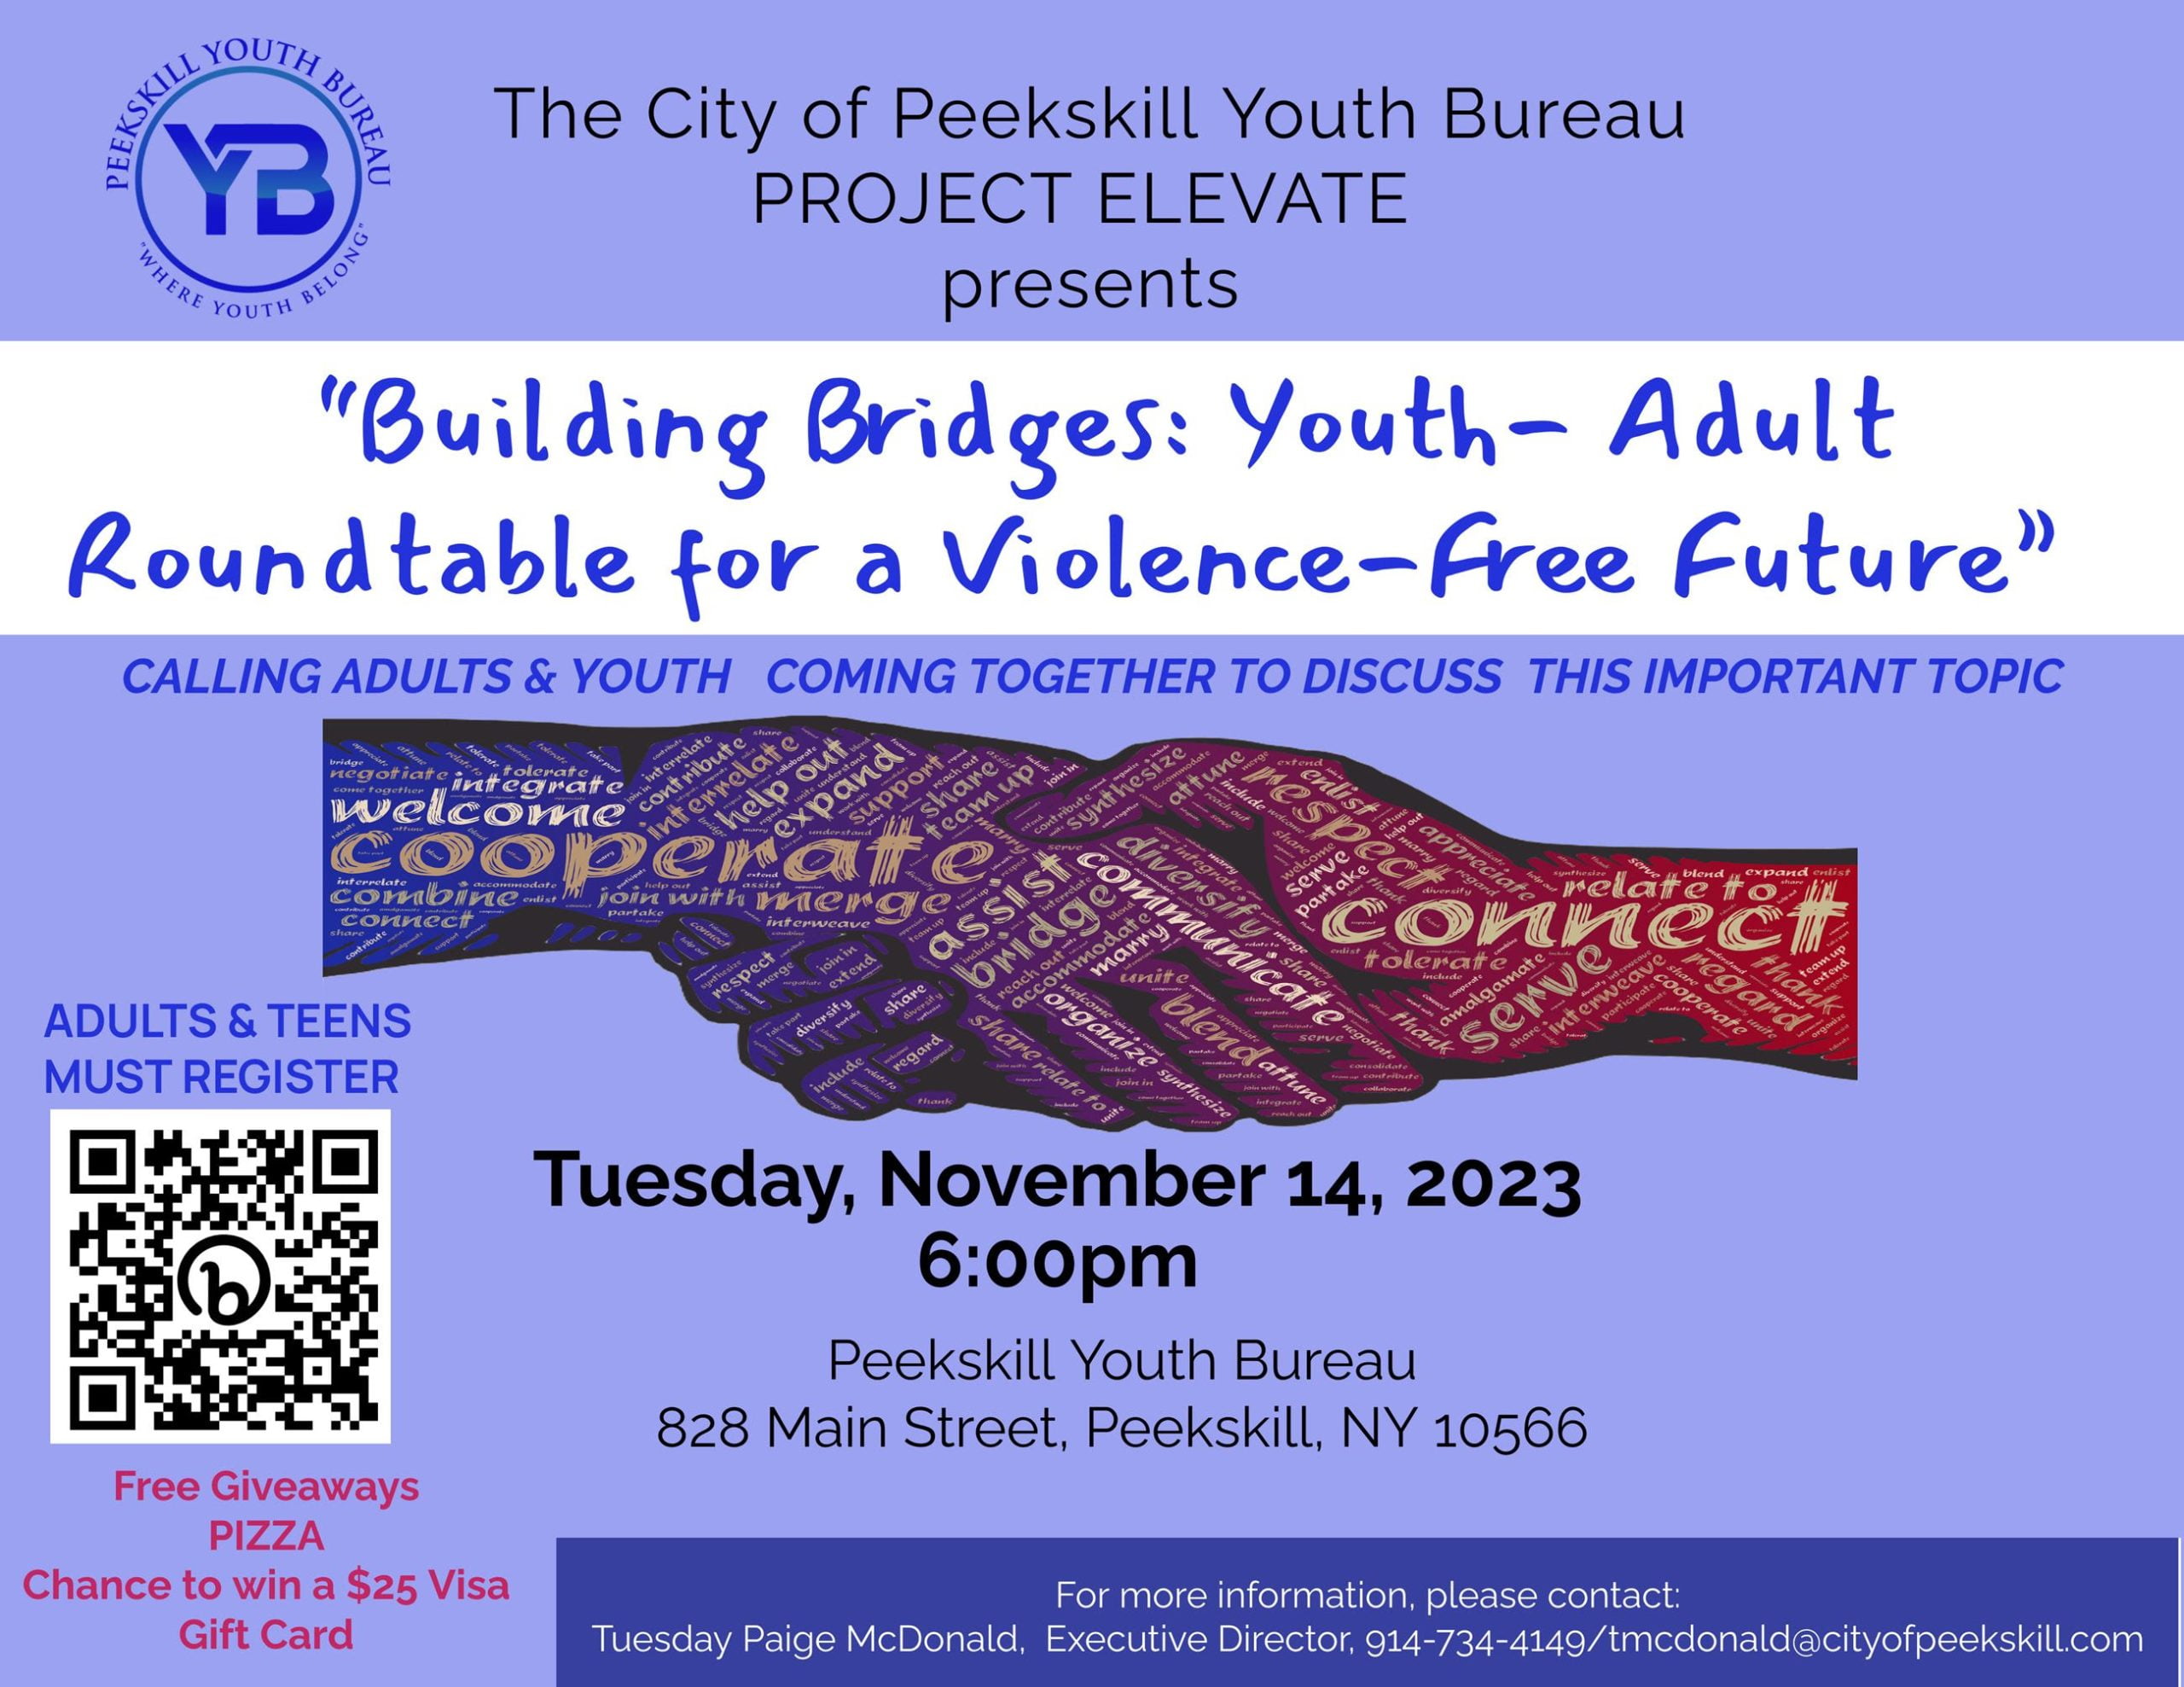 Flyer for Building Bridges: Youth - Adult Roundtable